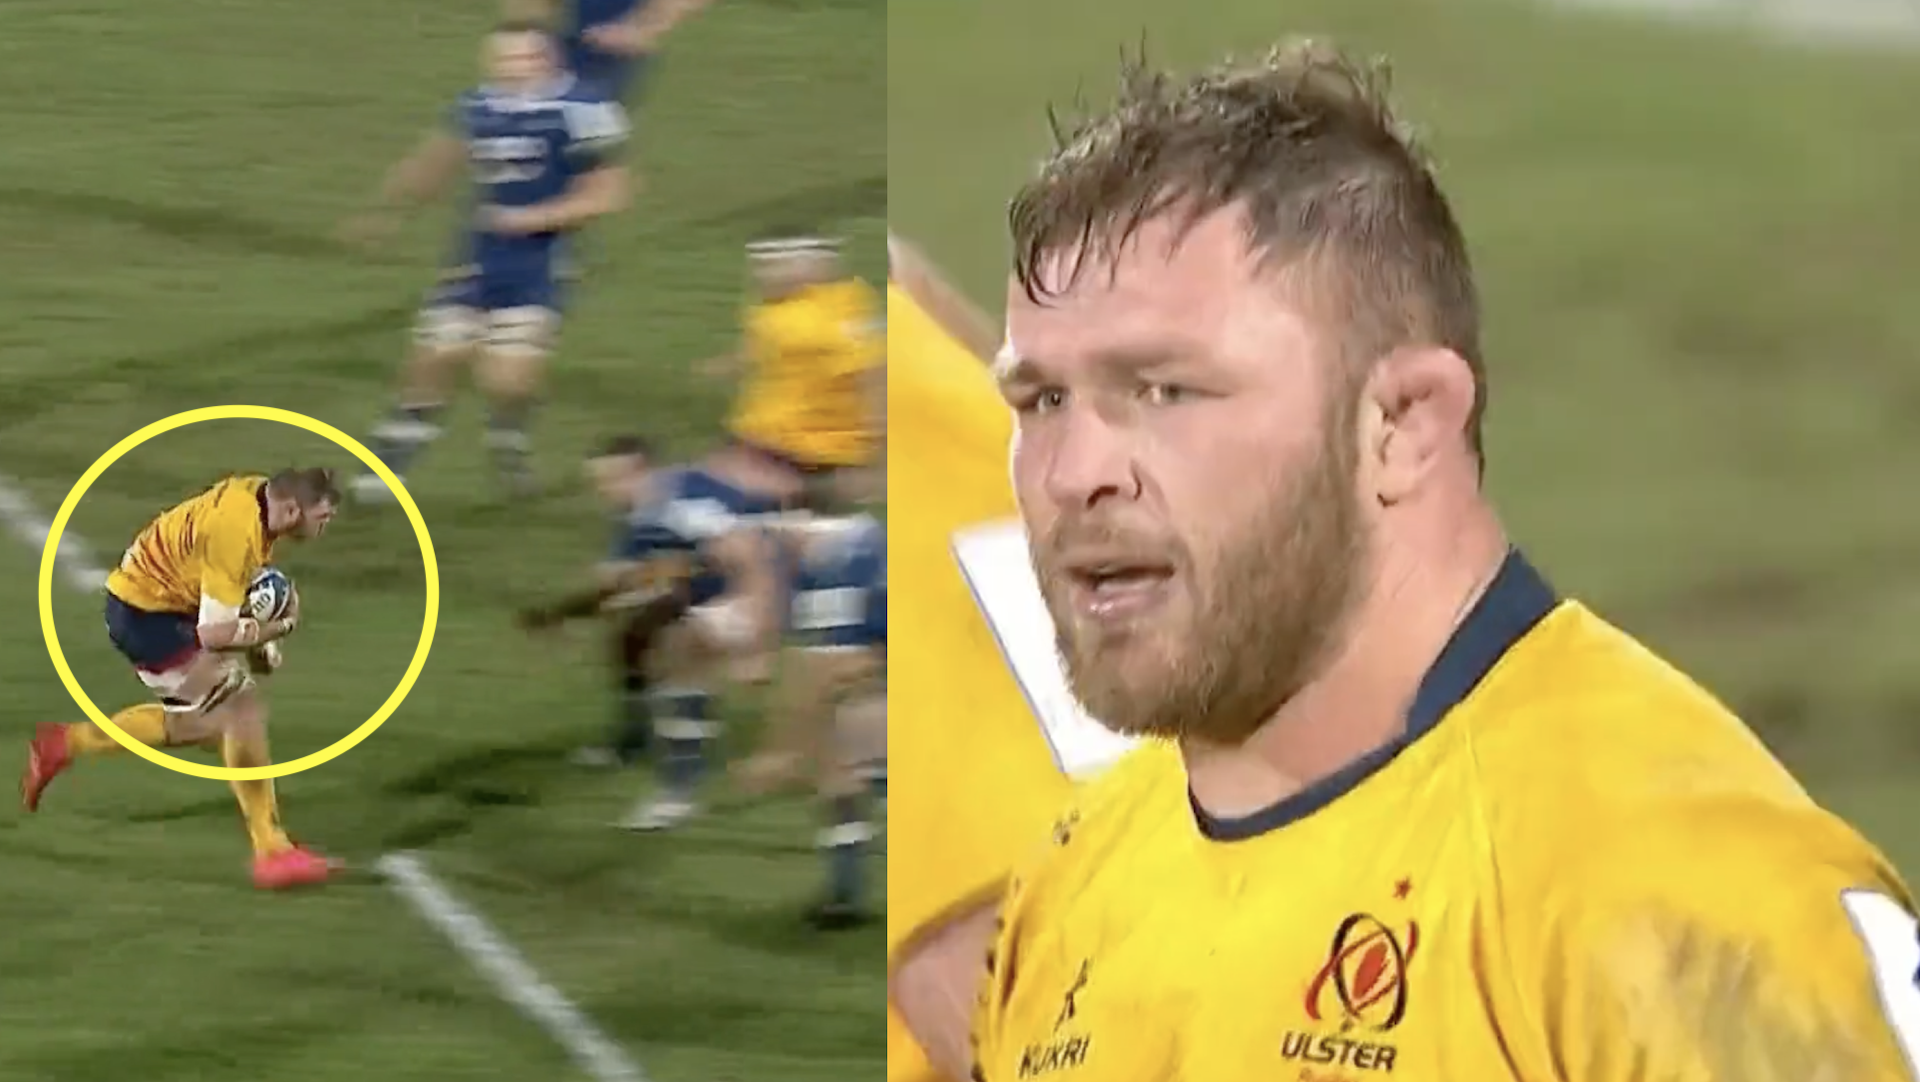 Lock and flanker go high on Duane Vermeulen and pay the price